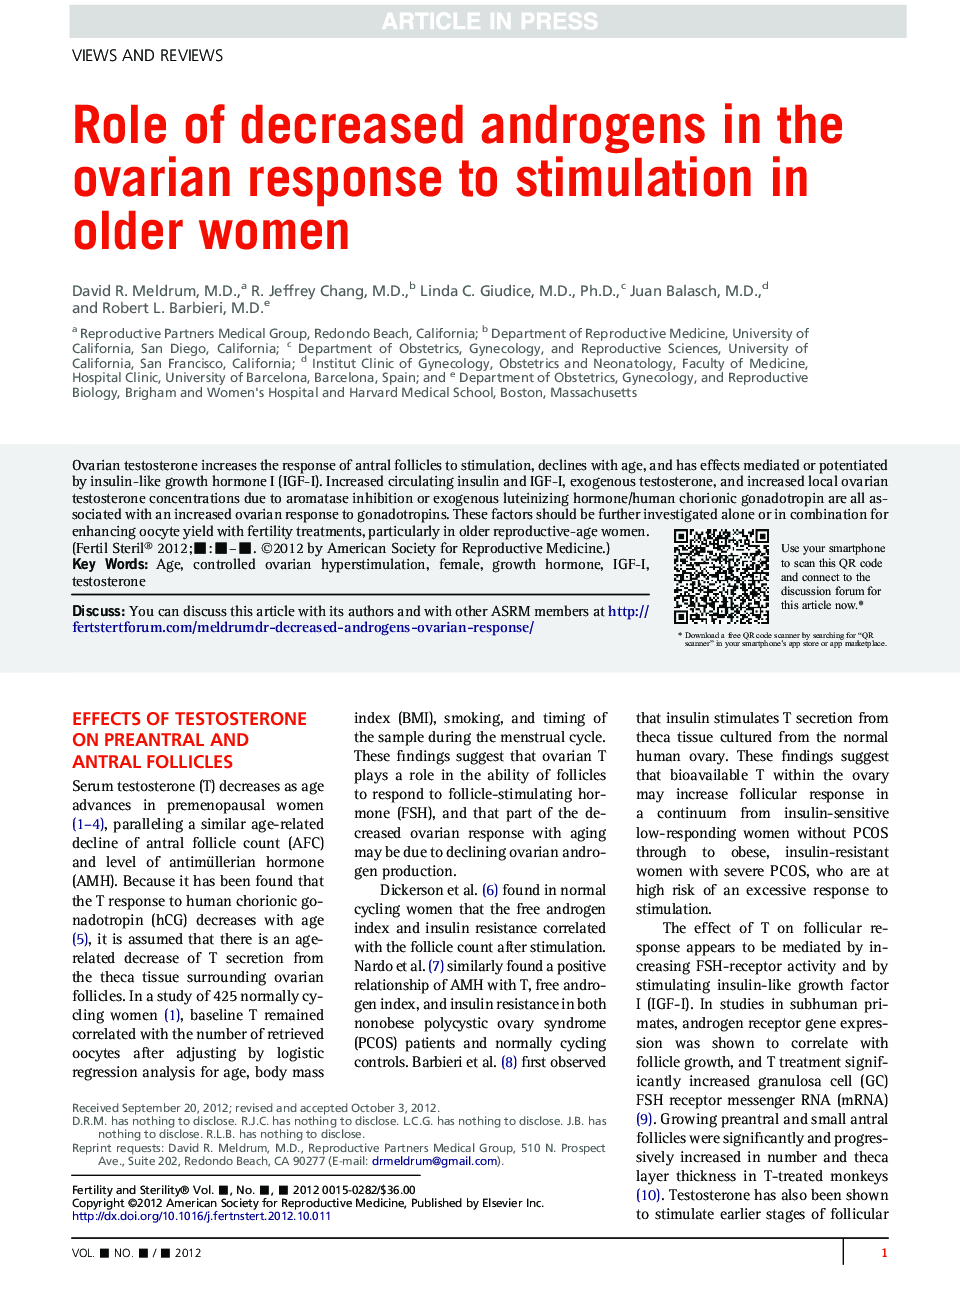 Role of decreased androgens in the ovarian response to stimulation in older women